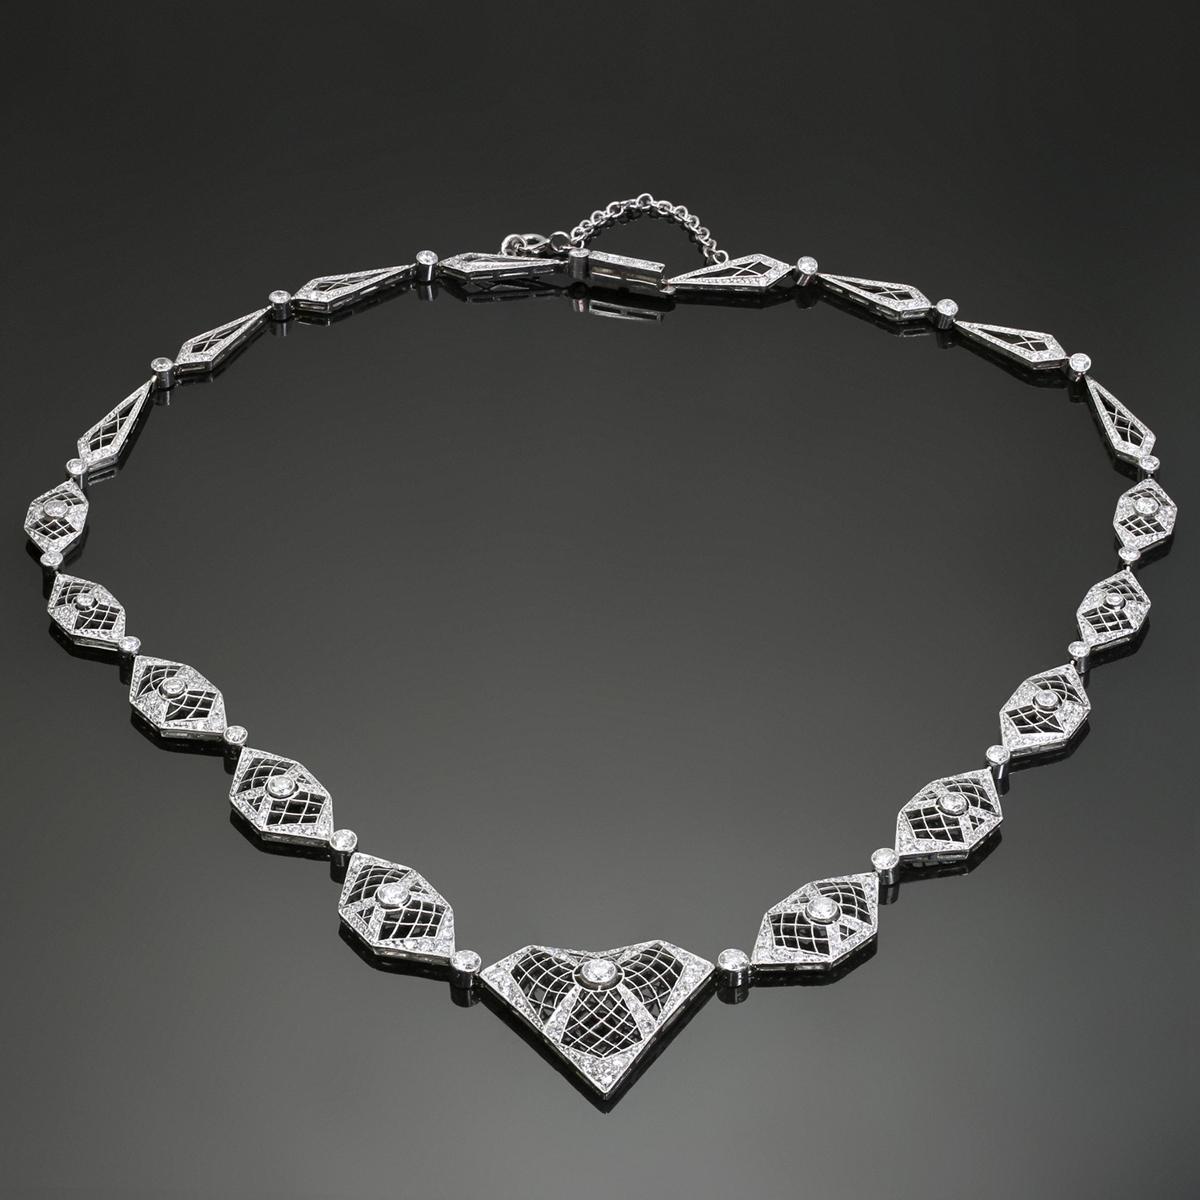 This magnificent retro evening necklace features a classic filigree design crafted in 950 platinum and 18k white gold and set with approximately 189 round G-H-I VS2-SI1 diamonds weighing an estimated 3.0 - 3.25 carats. Made in United States circa